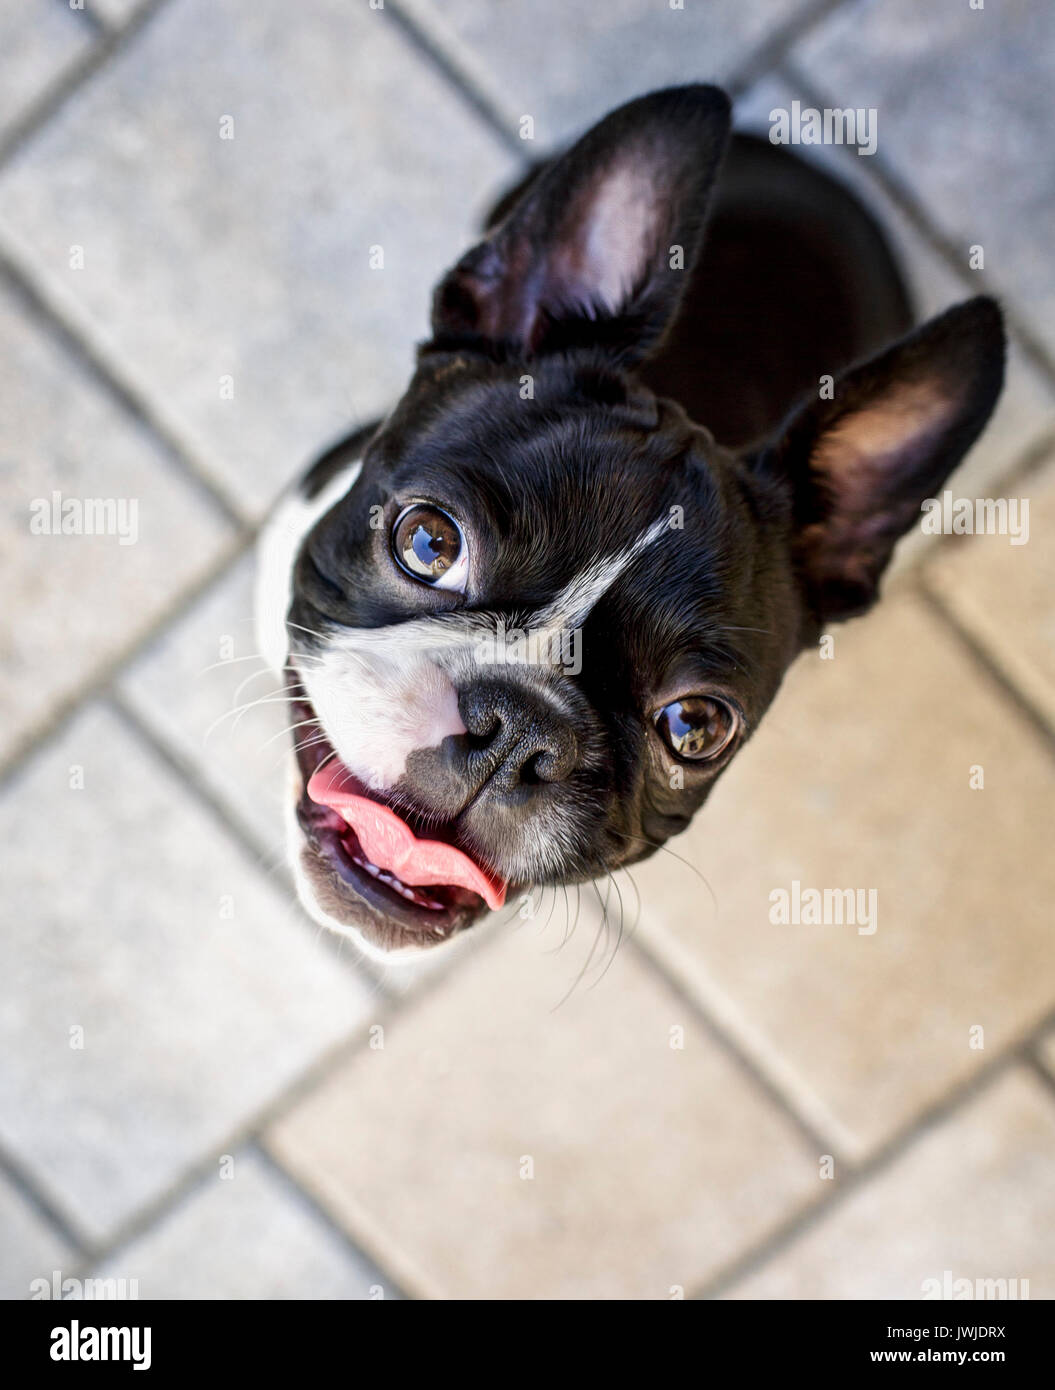 Outdoor portrait of a young Boston Terrier on a sunny summer day Stock Photo